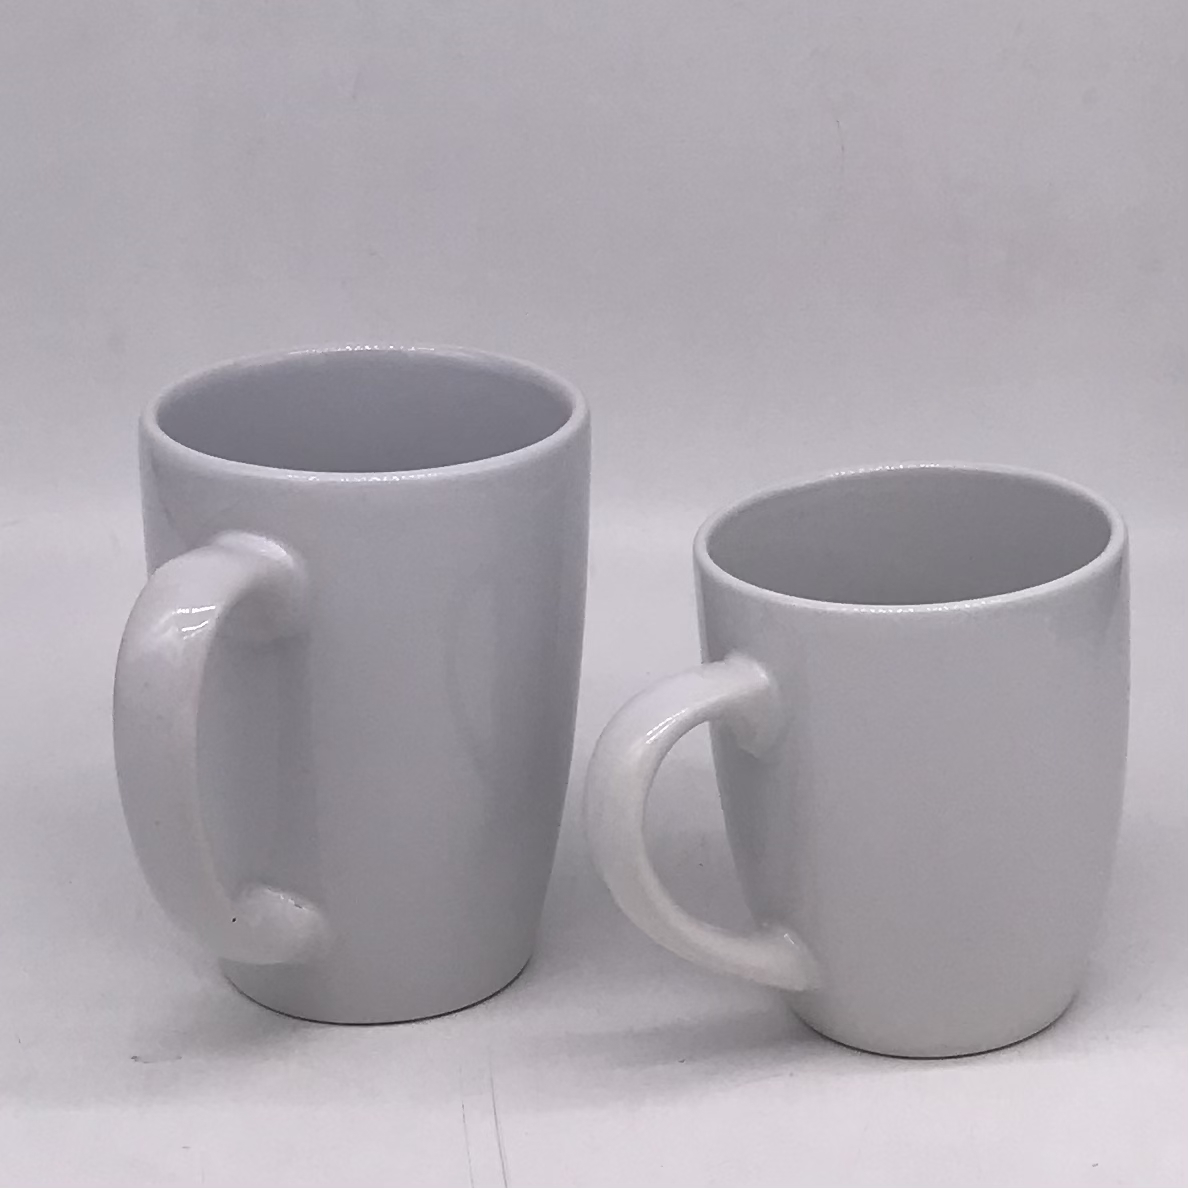 Blank Porcelain Mugs and Cups Featured Image